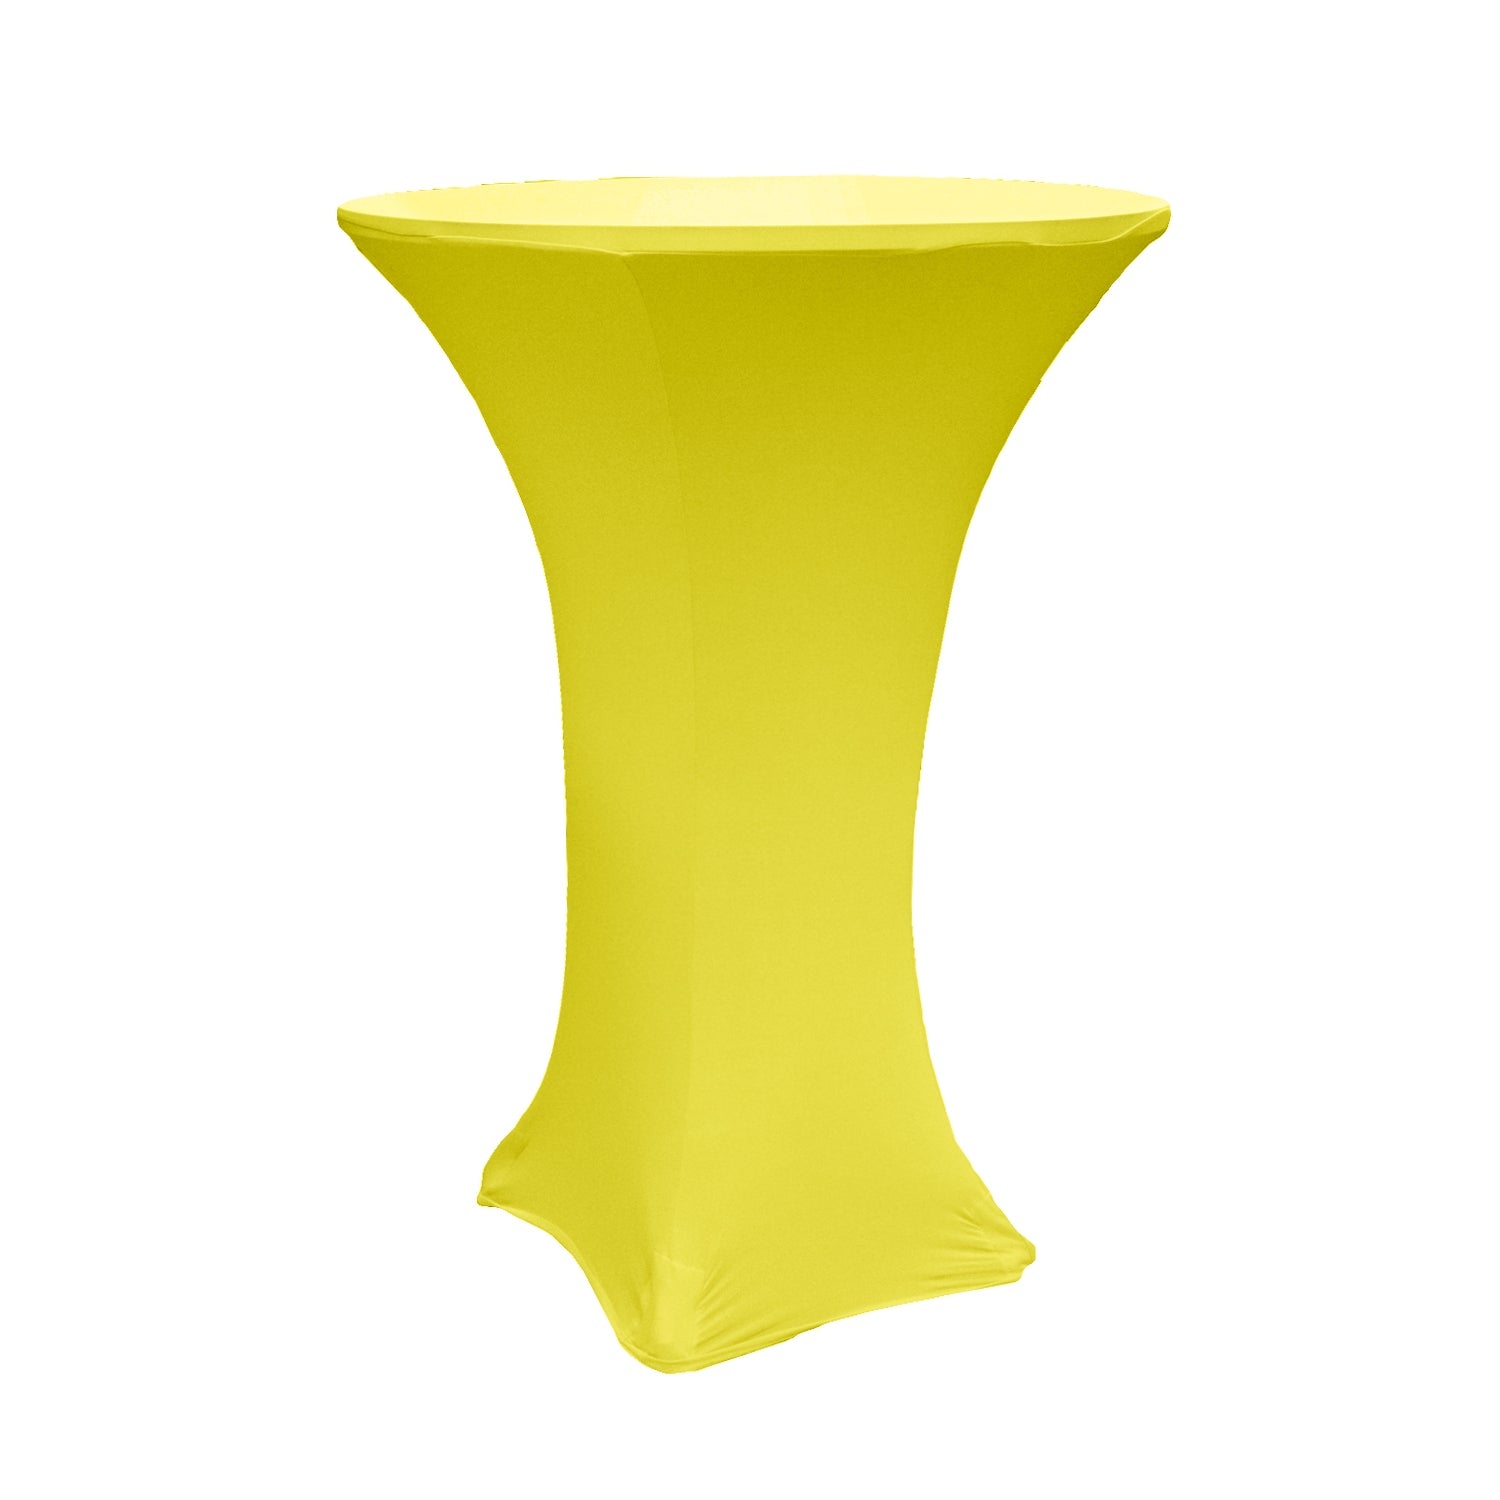 Spandex Cocktail Table Cover 36" Round - Bright Yellow - CV Linens